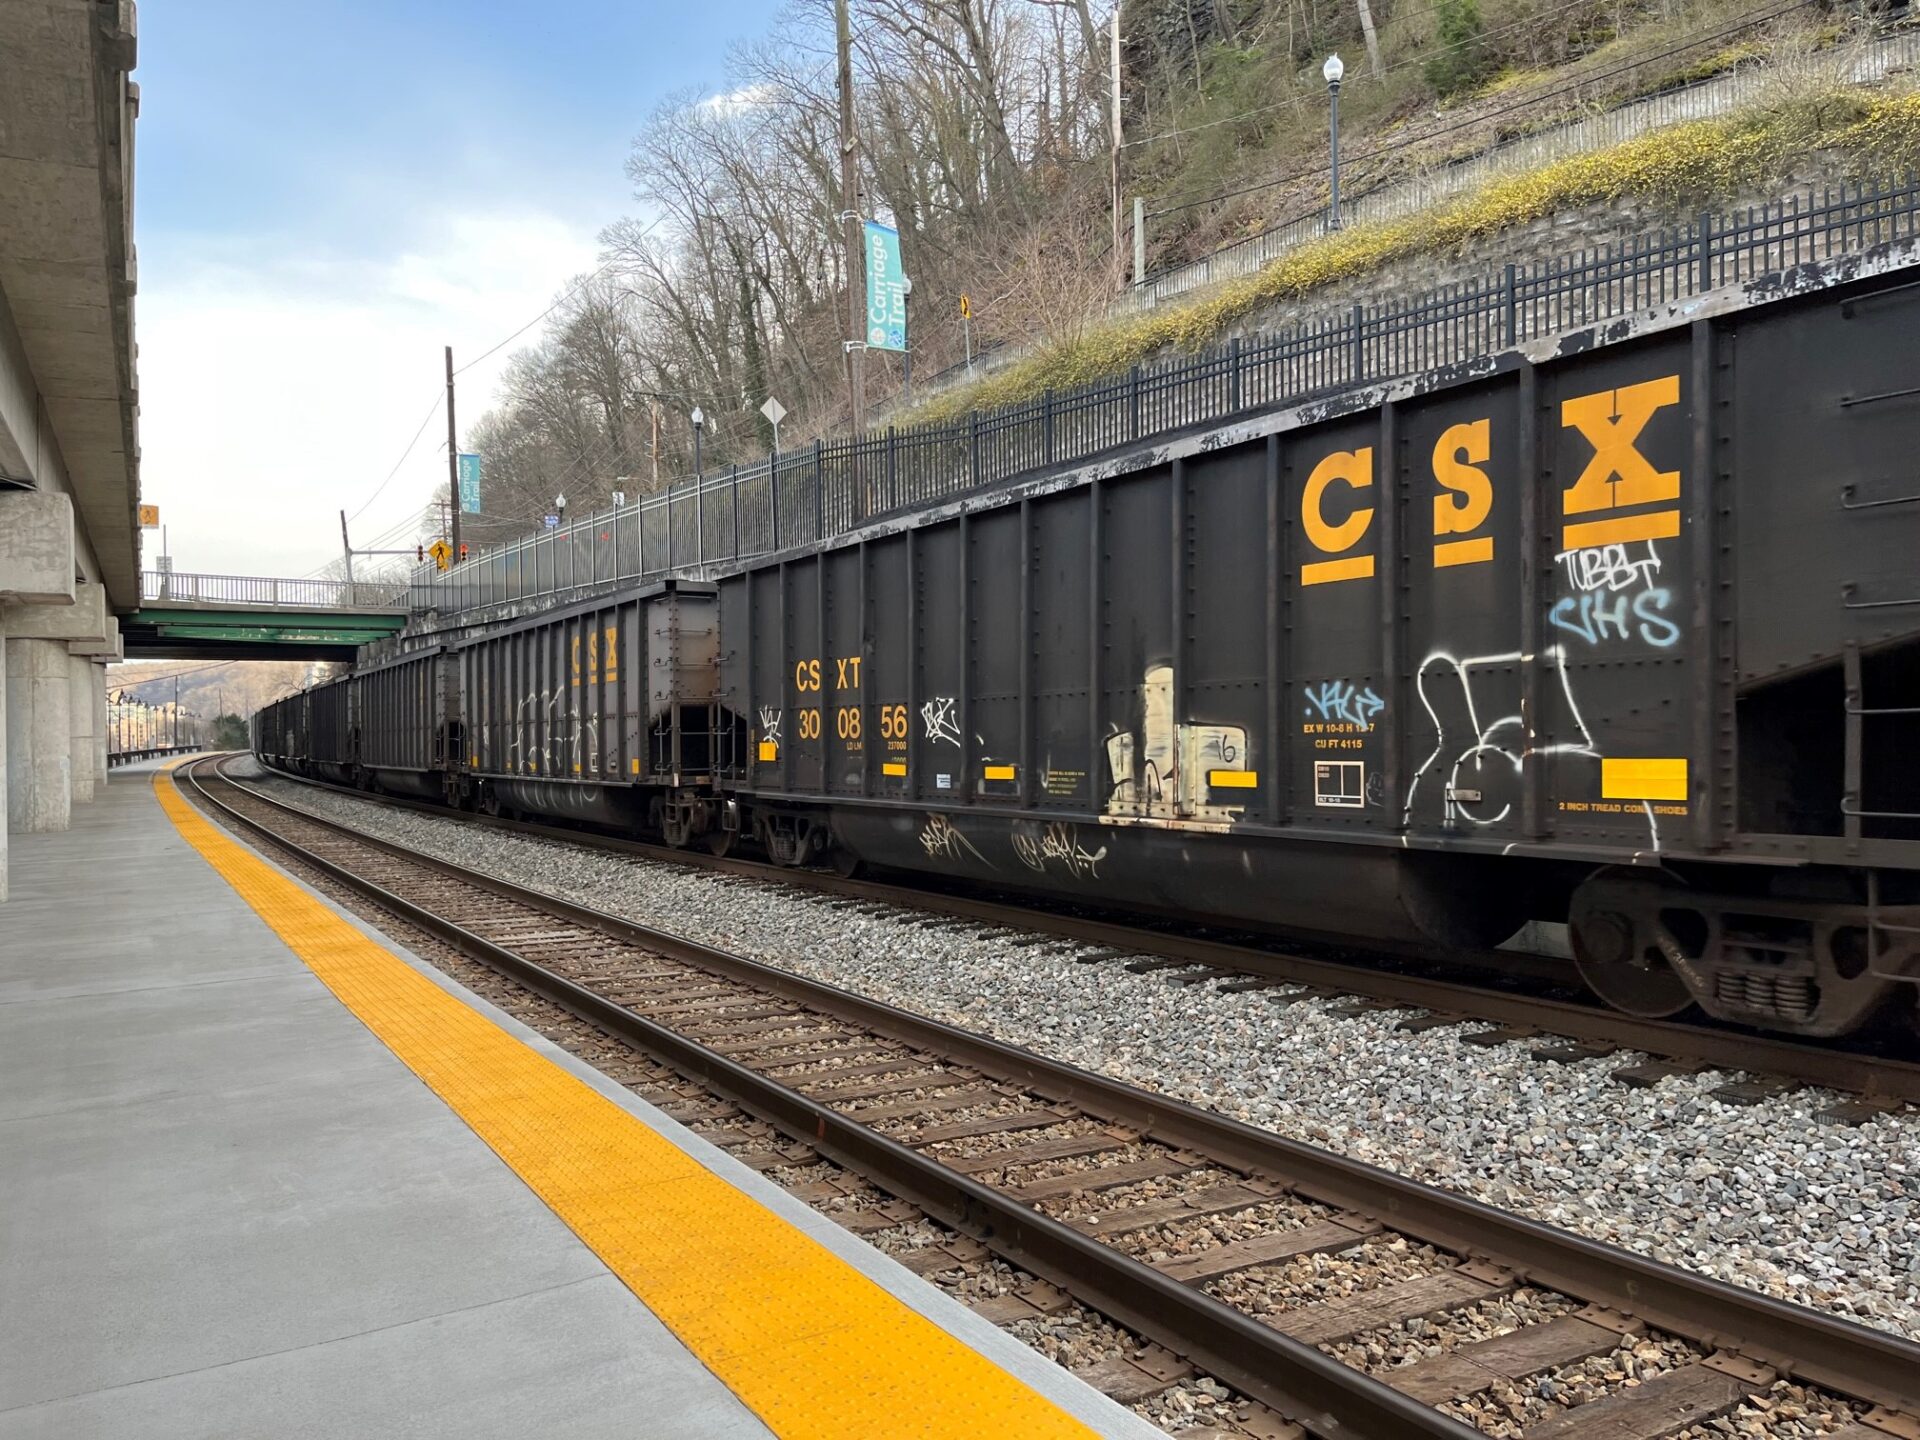 CSX Train Derails In New River Gorge, Injuring 3 Railroad Workers